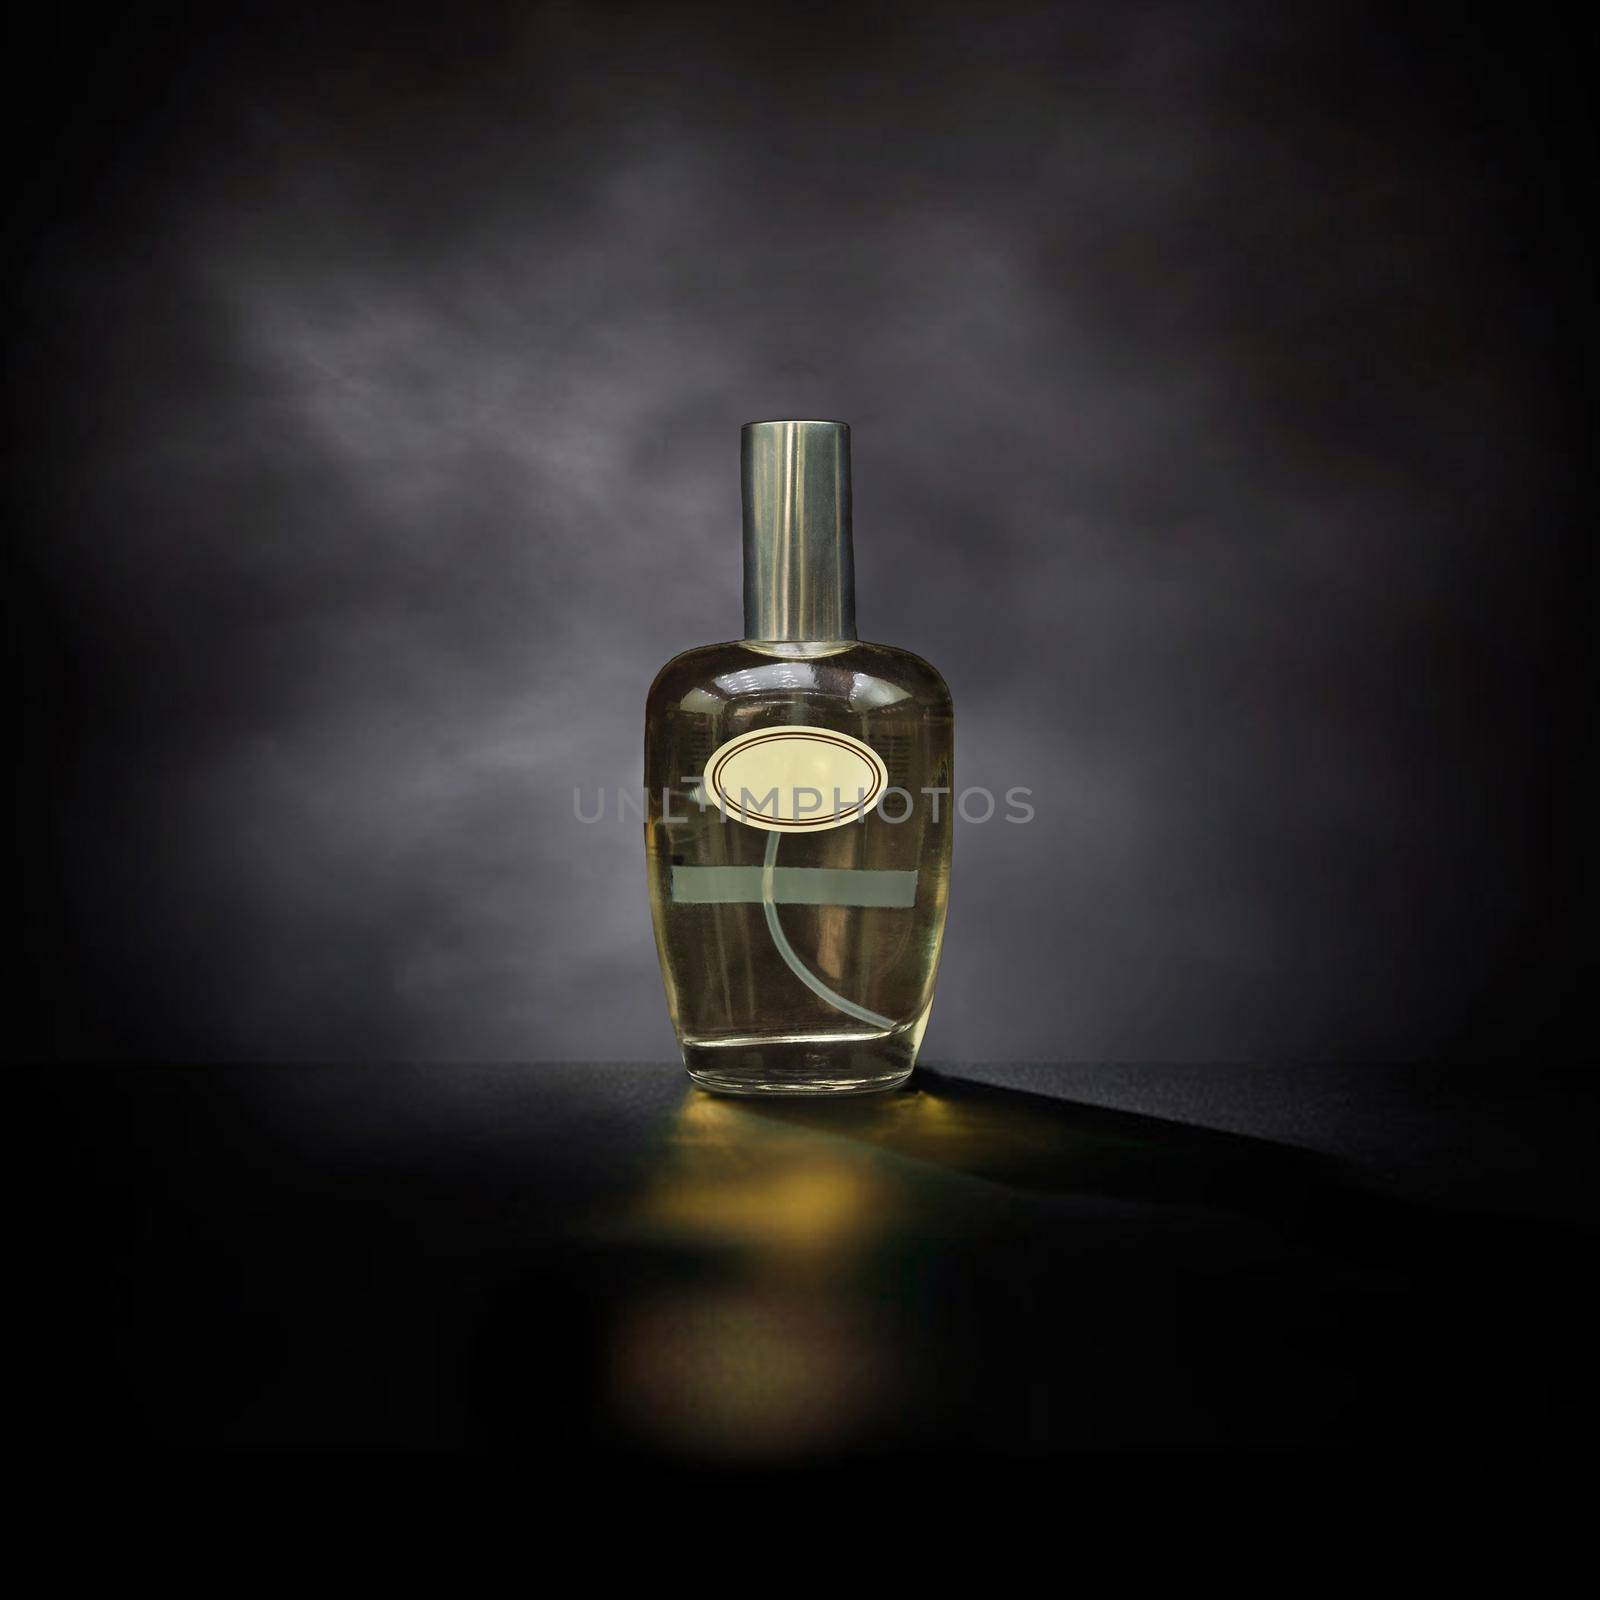 Perfume flacon abstract dark background by ferhad